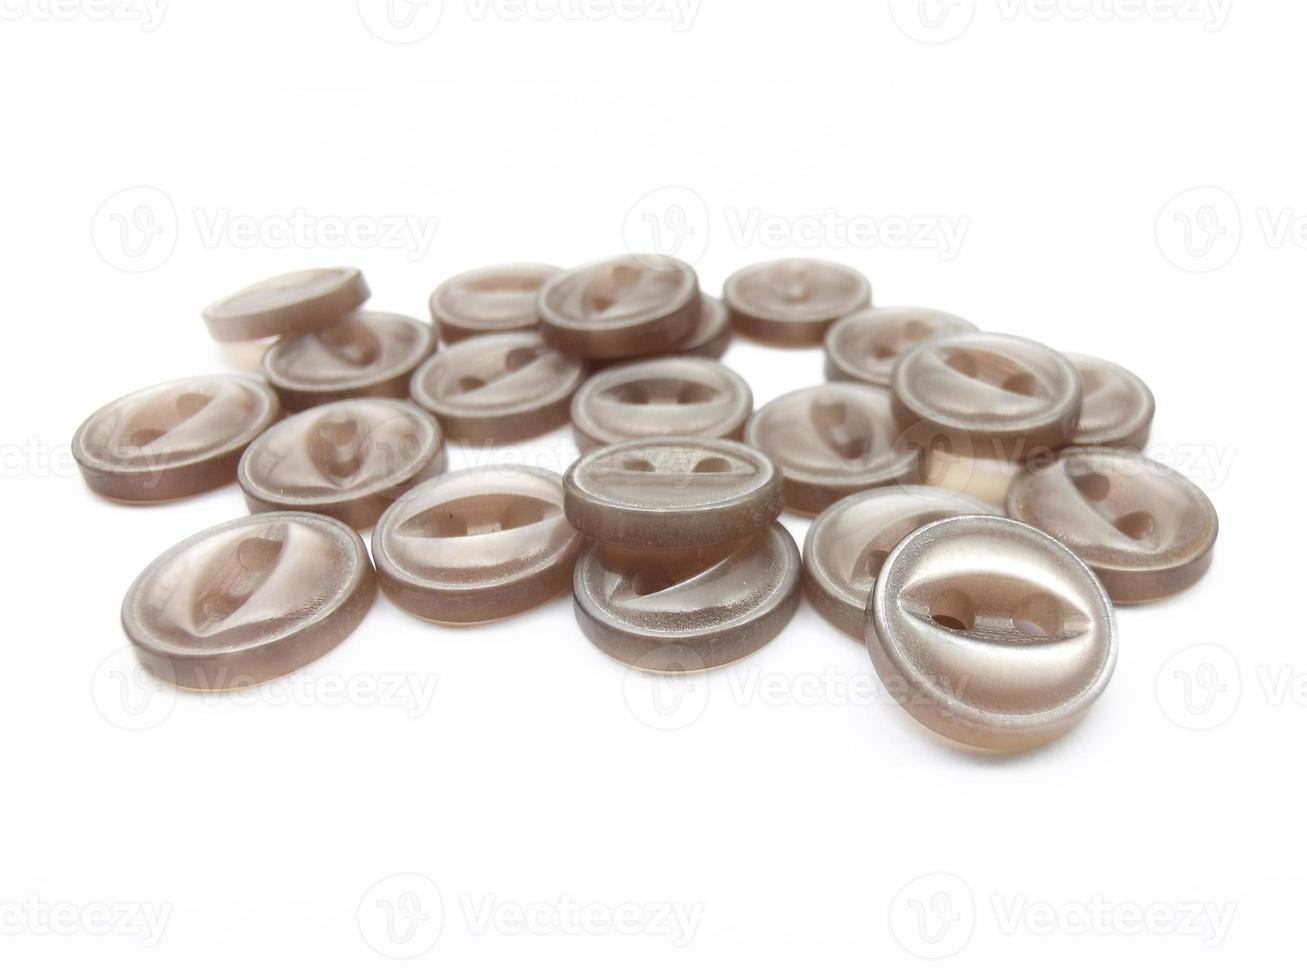 clothing buttons on white background photo